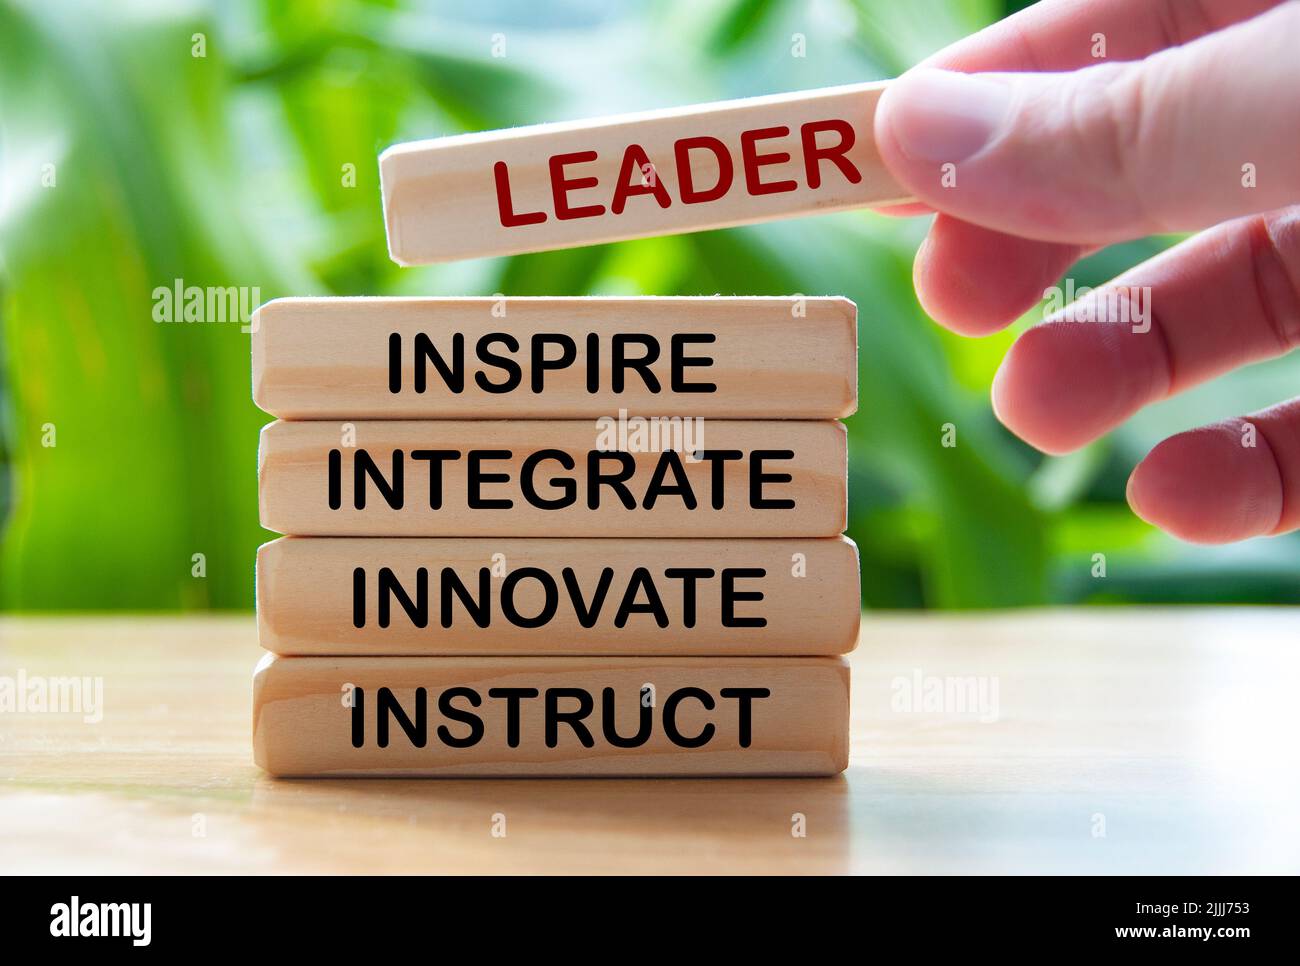 Hand holding wooden blocks with text - Leader, inspire, integrate, innovate, instruct. Leadership concept Stock Photo